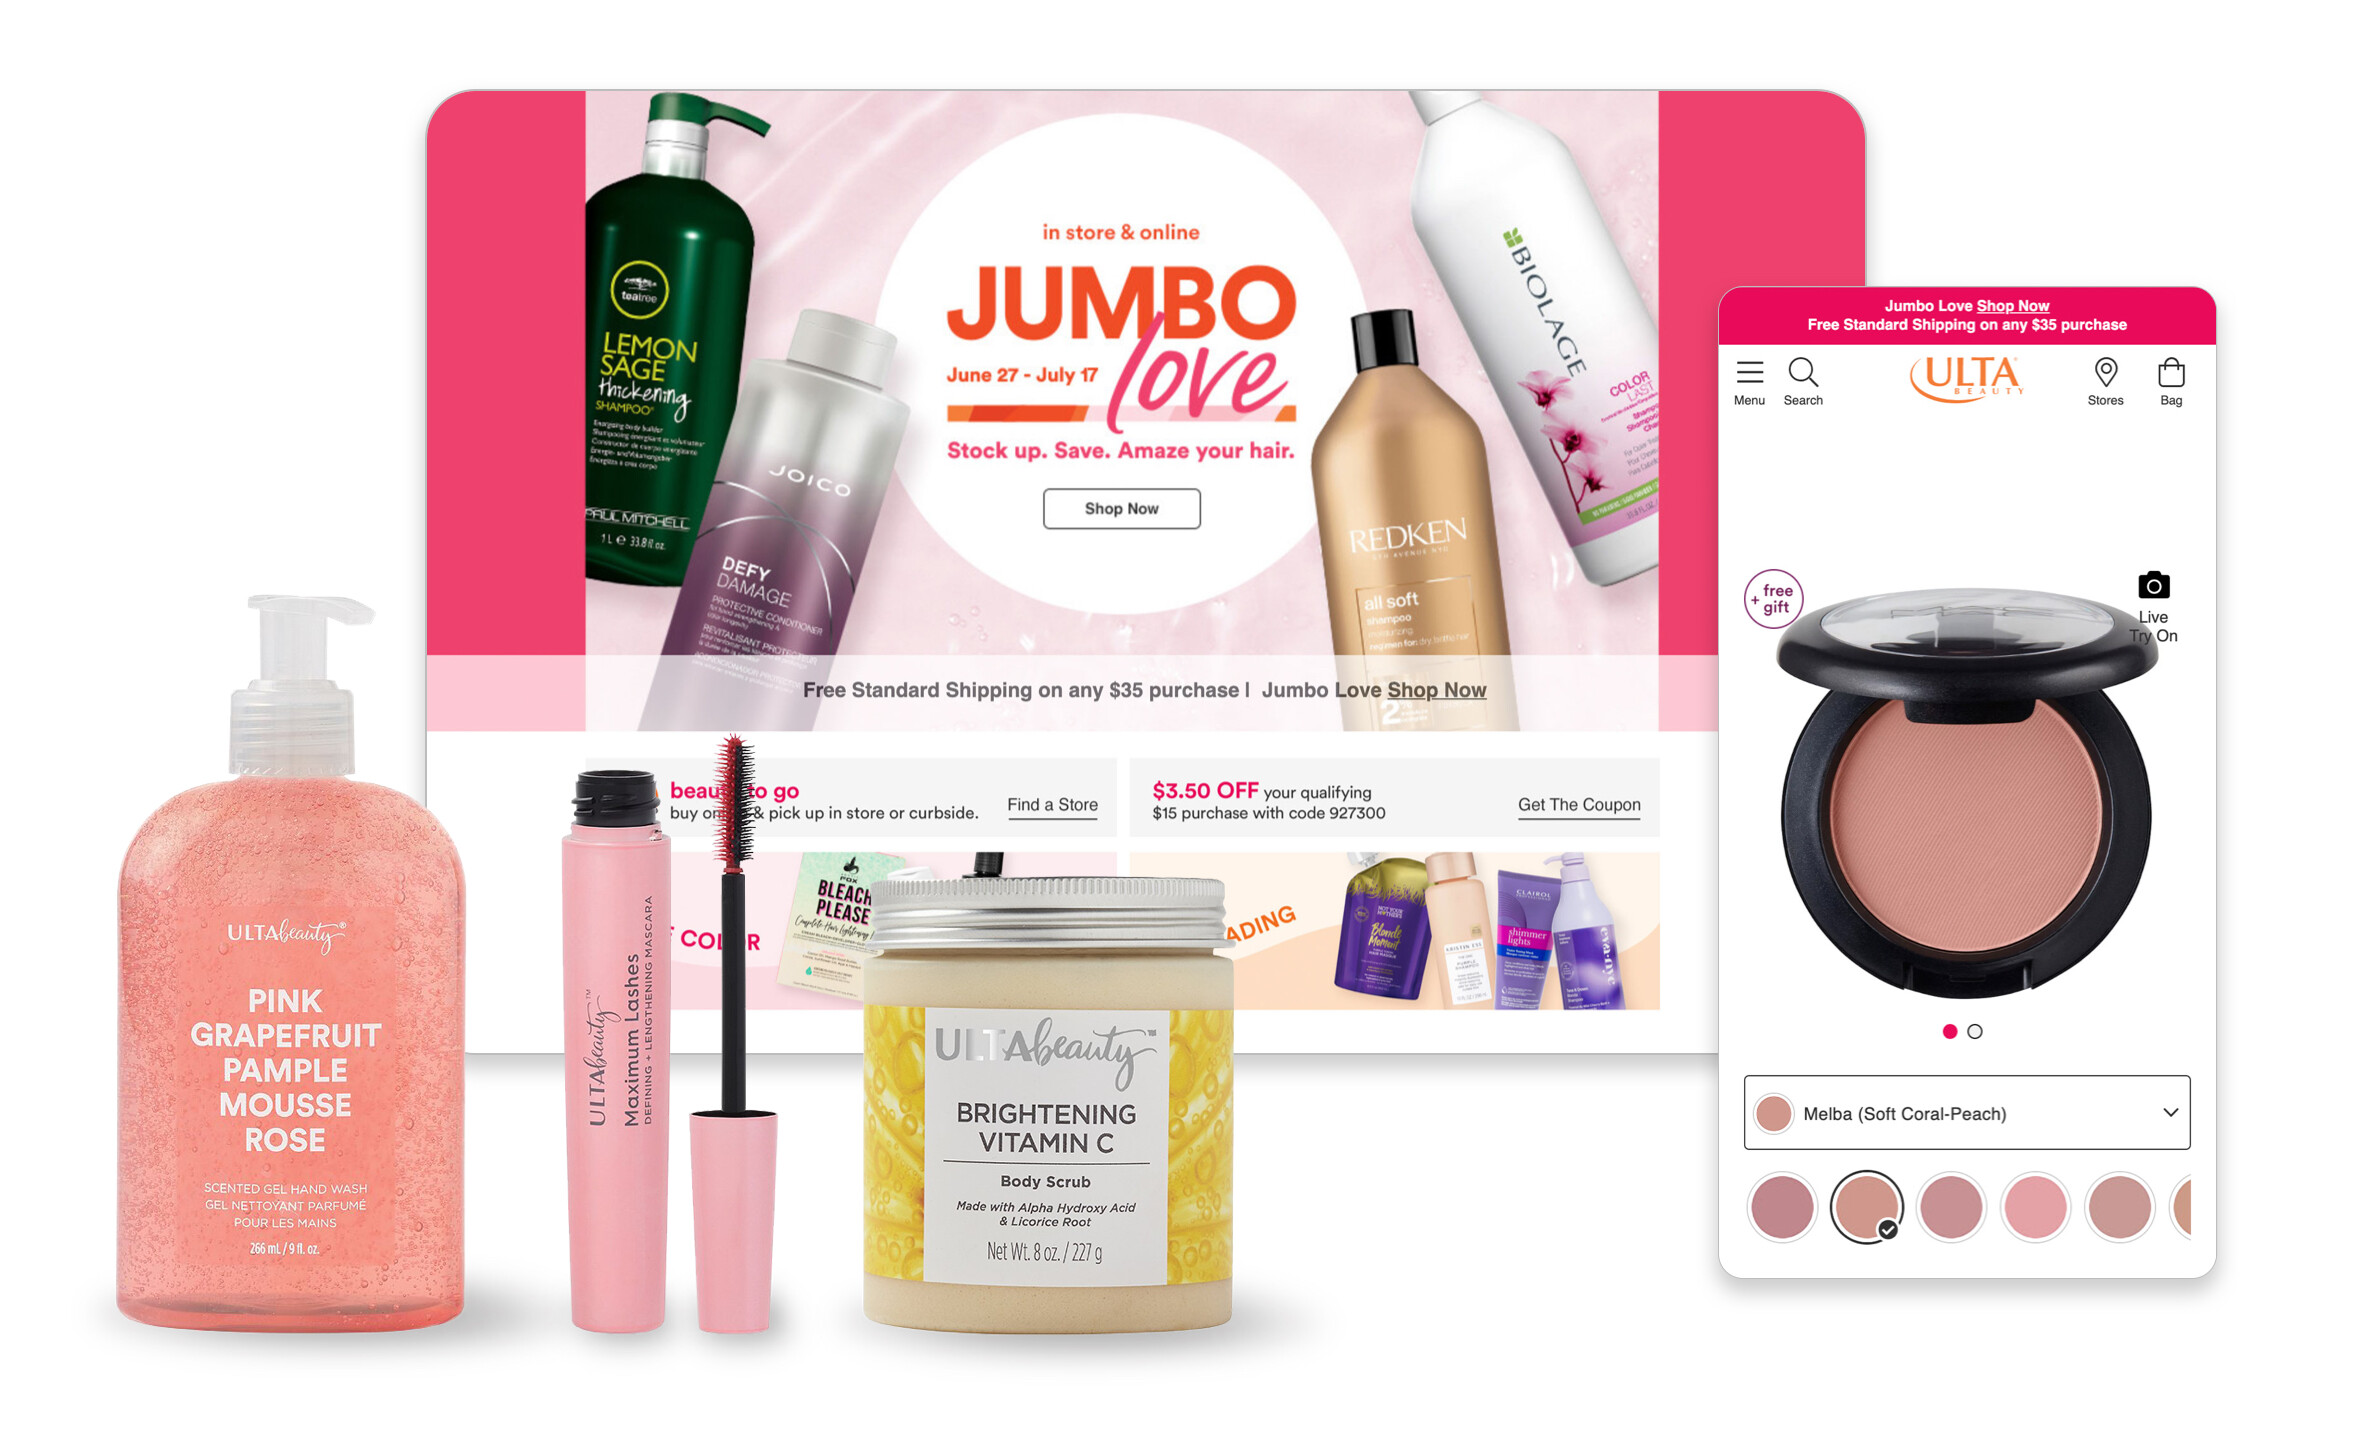 Ulta Beauty's commerce platform that allows better consumer experiences and easy expansions into new markets